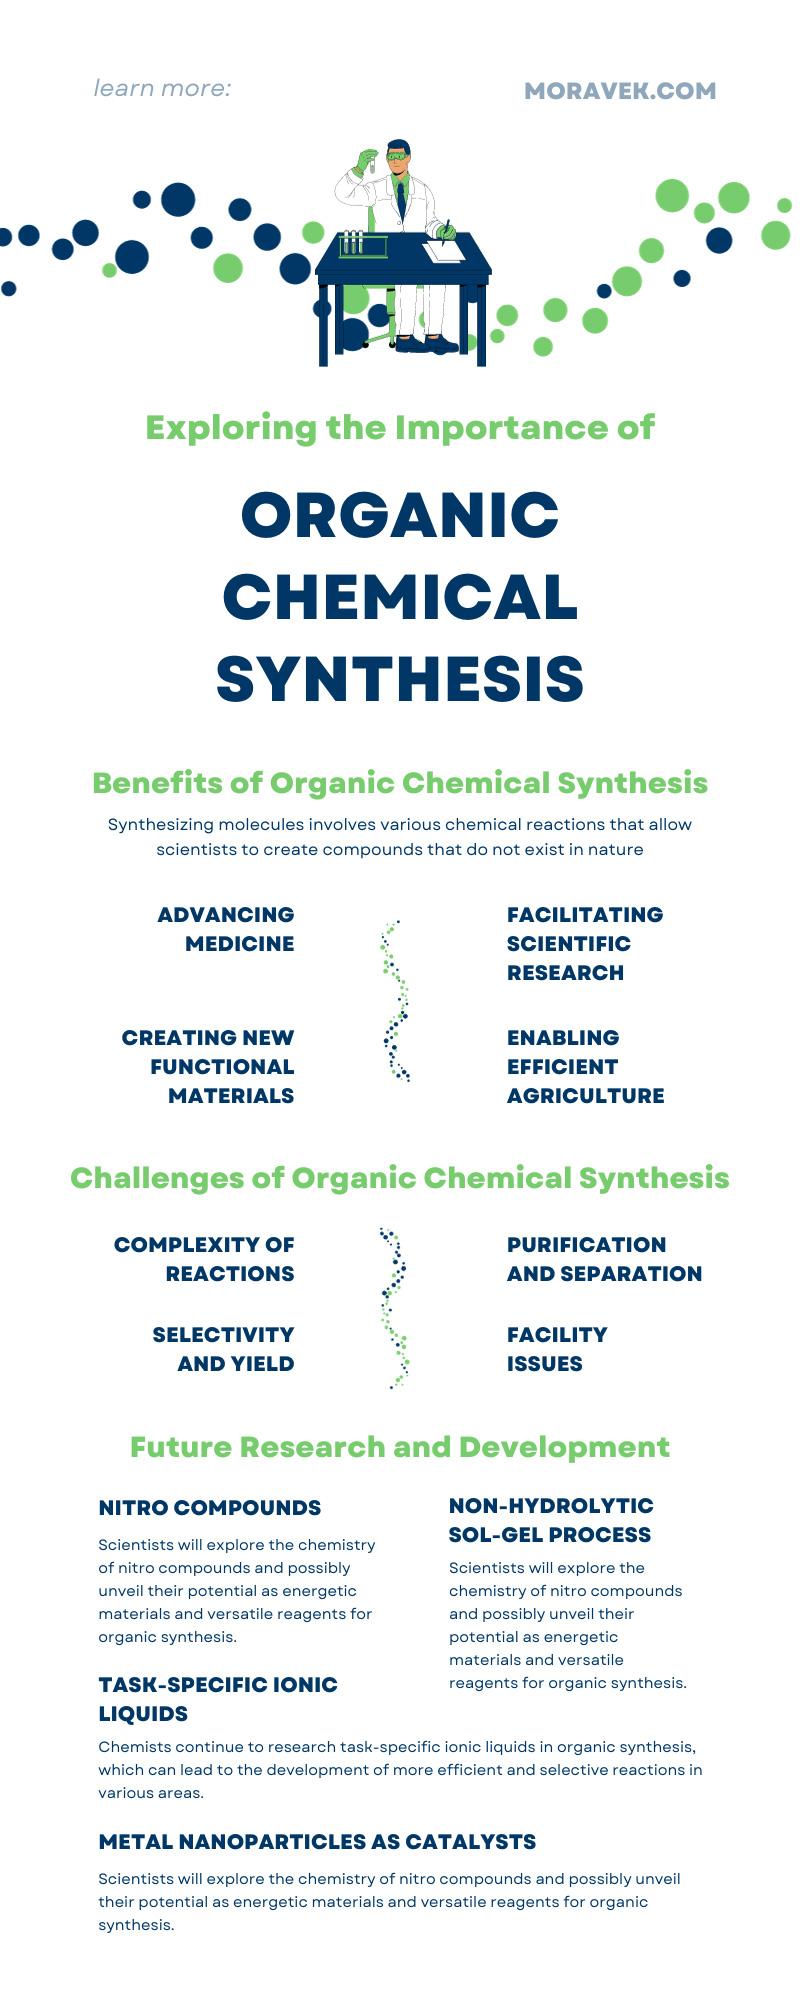 Exploring the Importance of Organic Chemical Synthesis